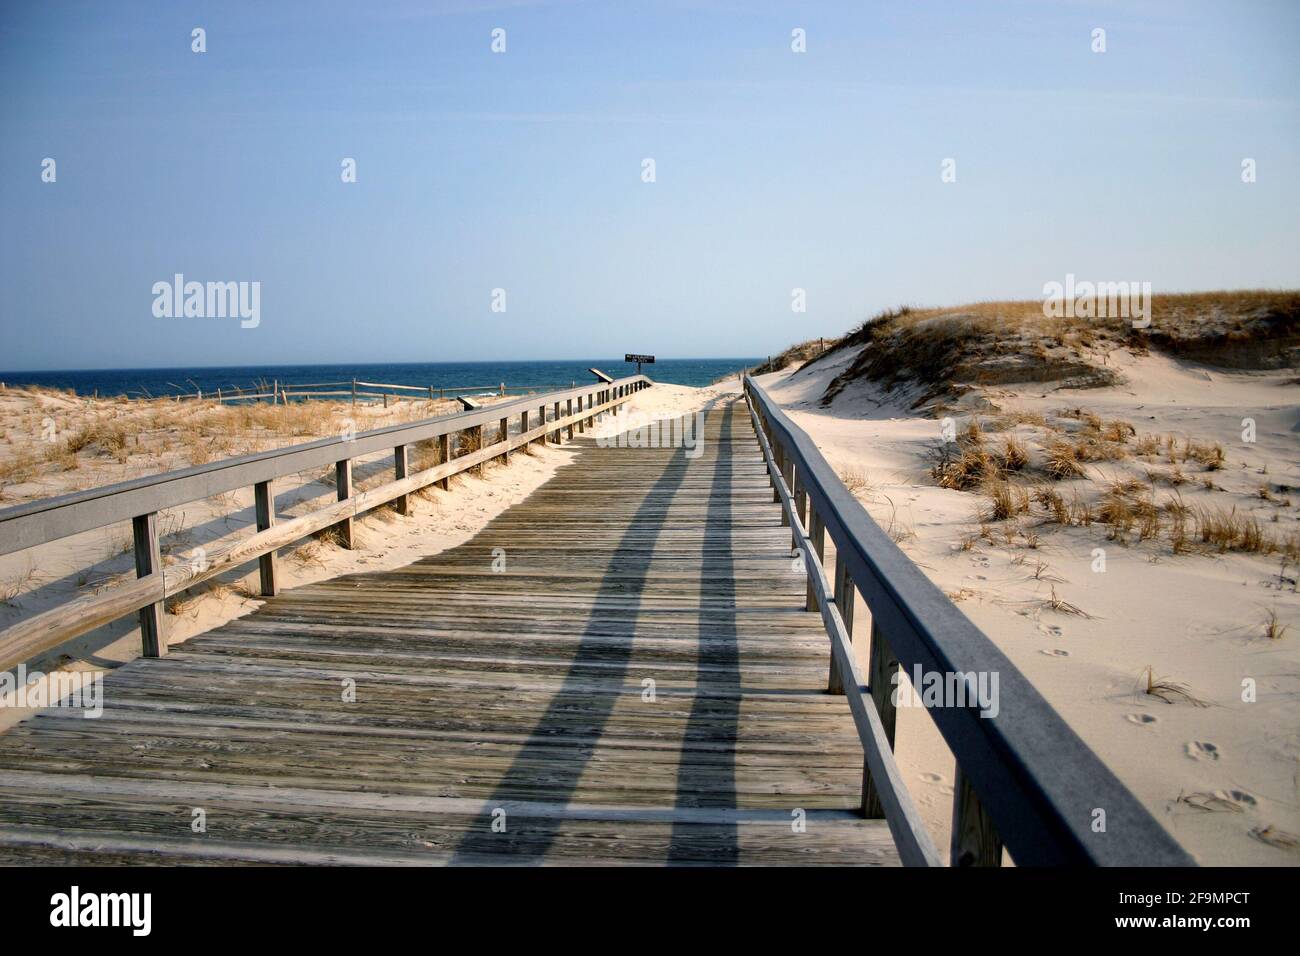 Summer is coming, boardwalk to Beach, New Jersey shore, USA Stock Photo